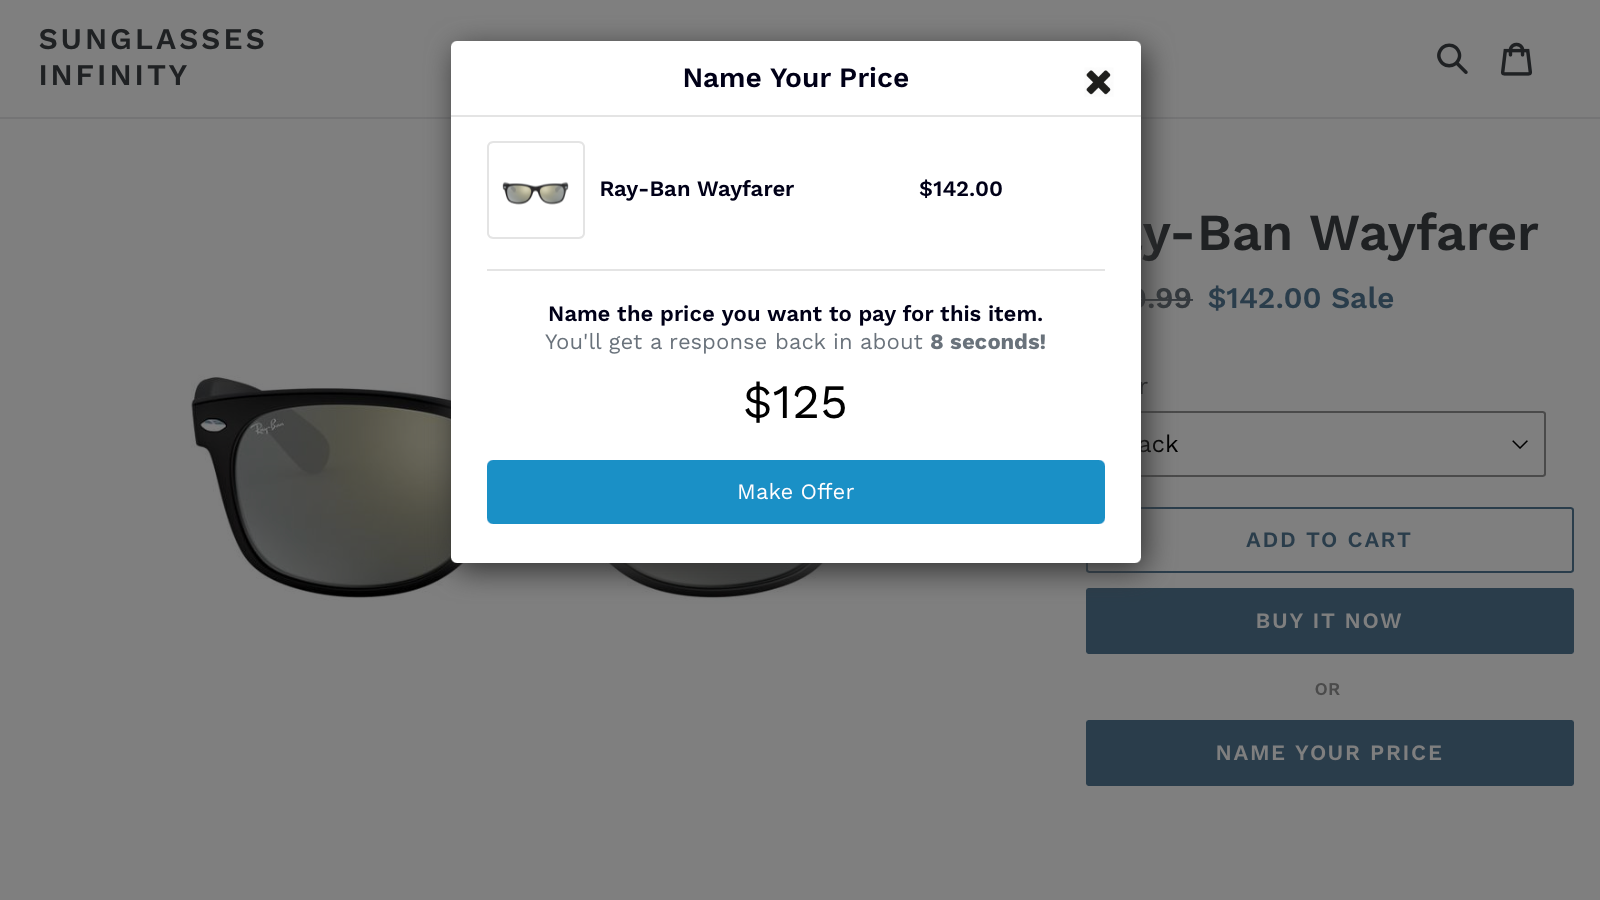 Enable shoppers to make a price offer to keep them on your store